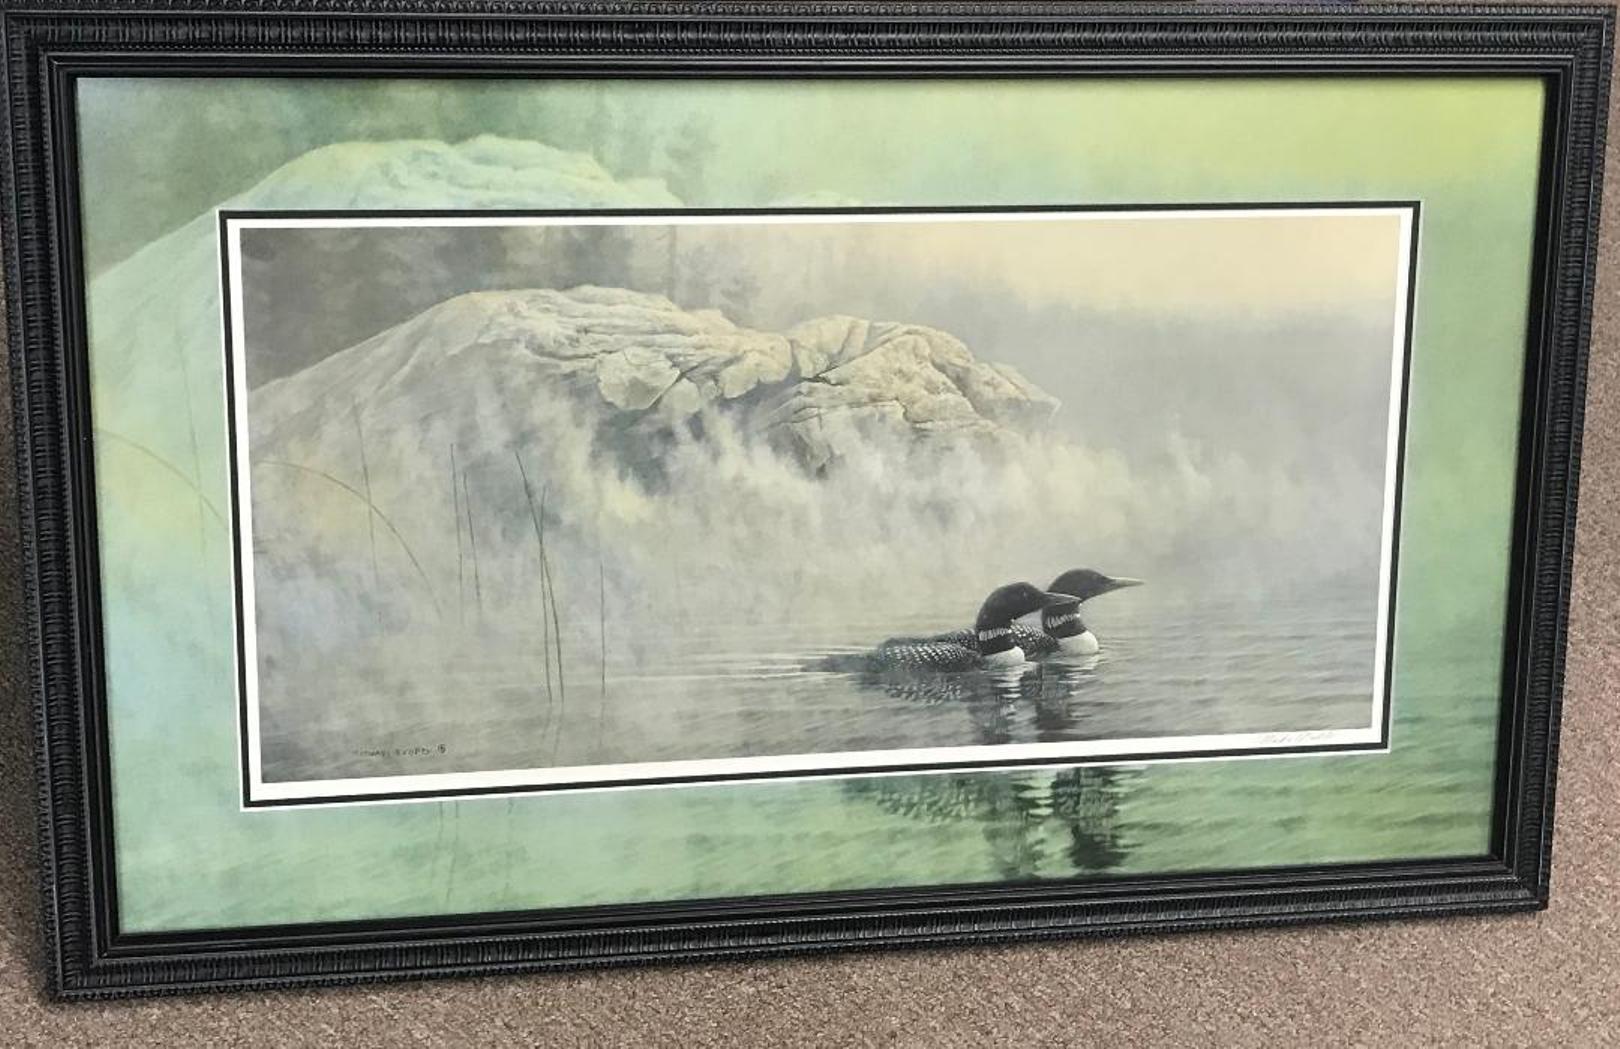 A limited edition offset print by award winning contemporary artist Michael Budden that showcases a pair of loons in their natural environment created in an impressionistic realism style housed in a printed mat to match framed under museum image